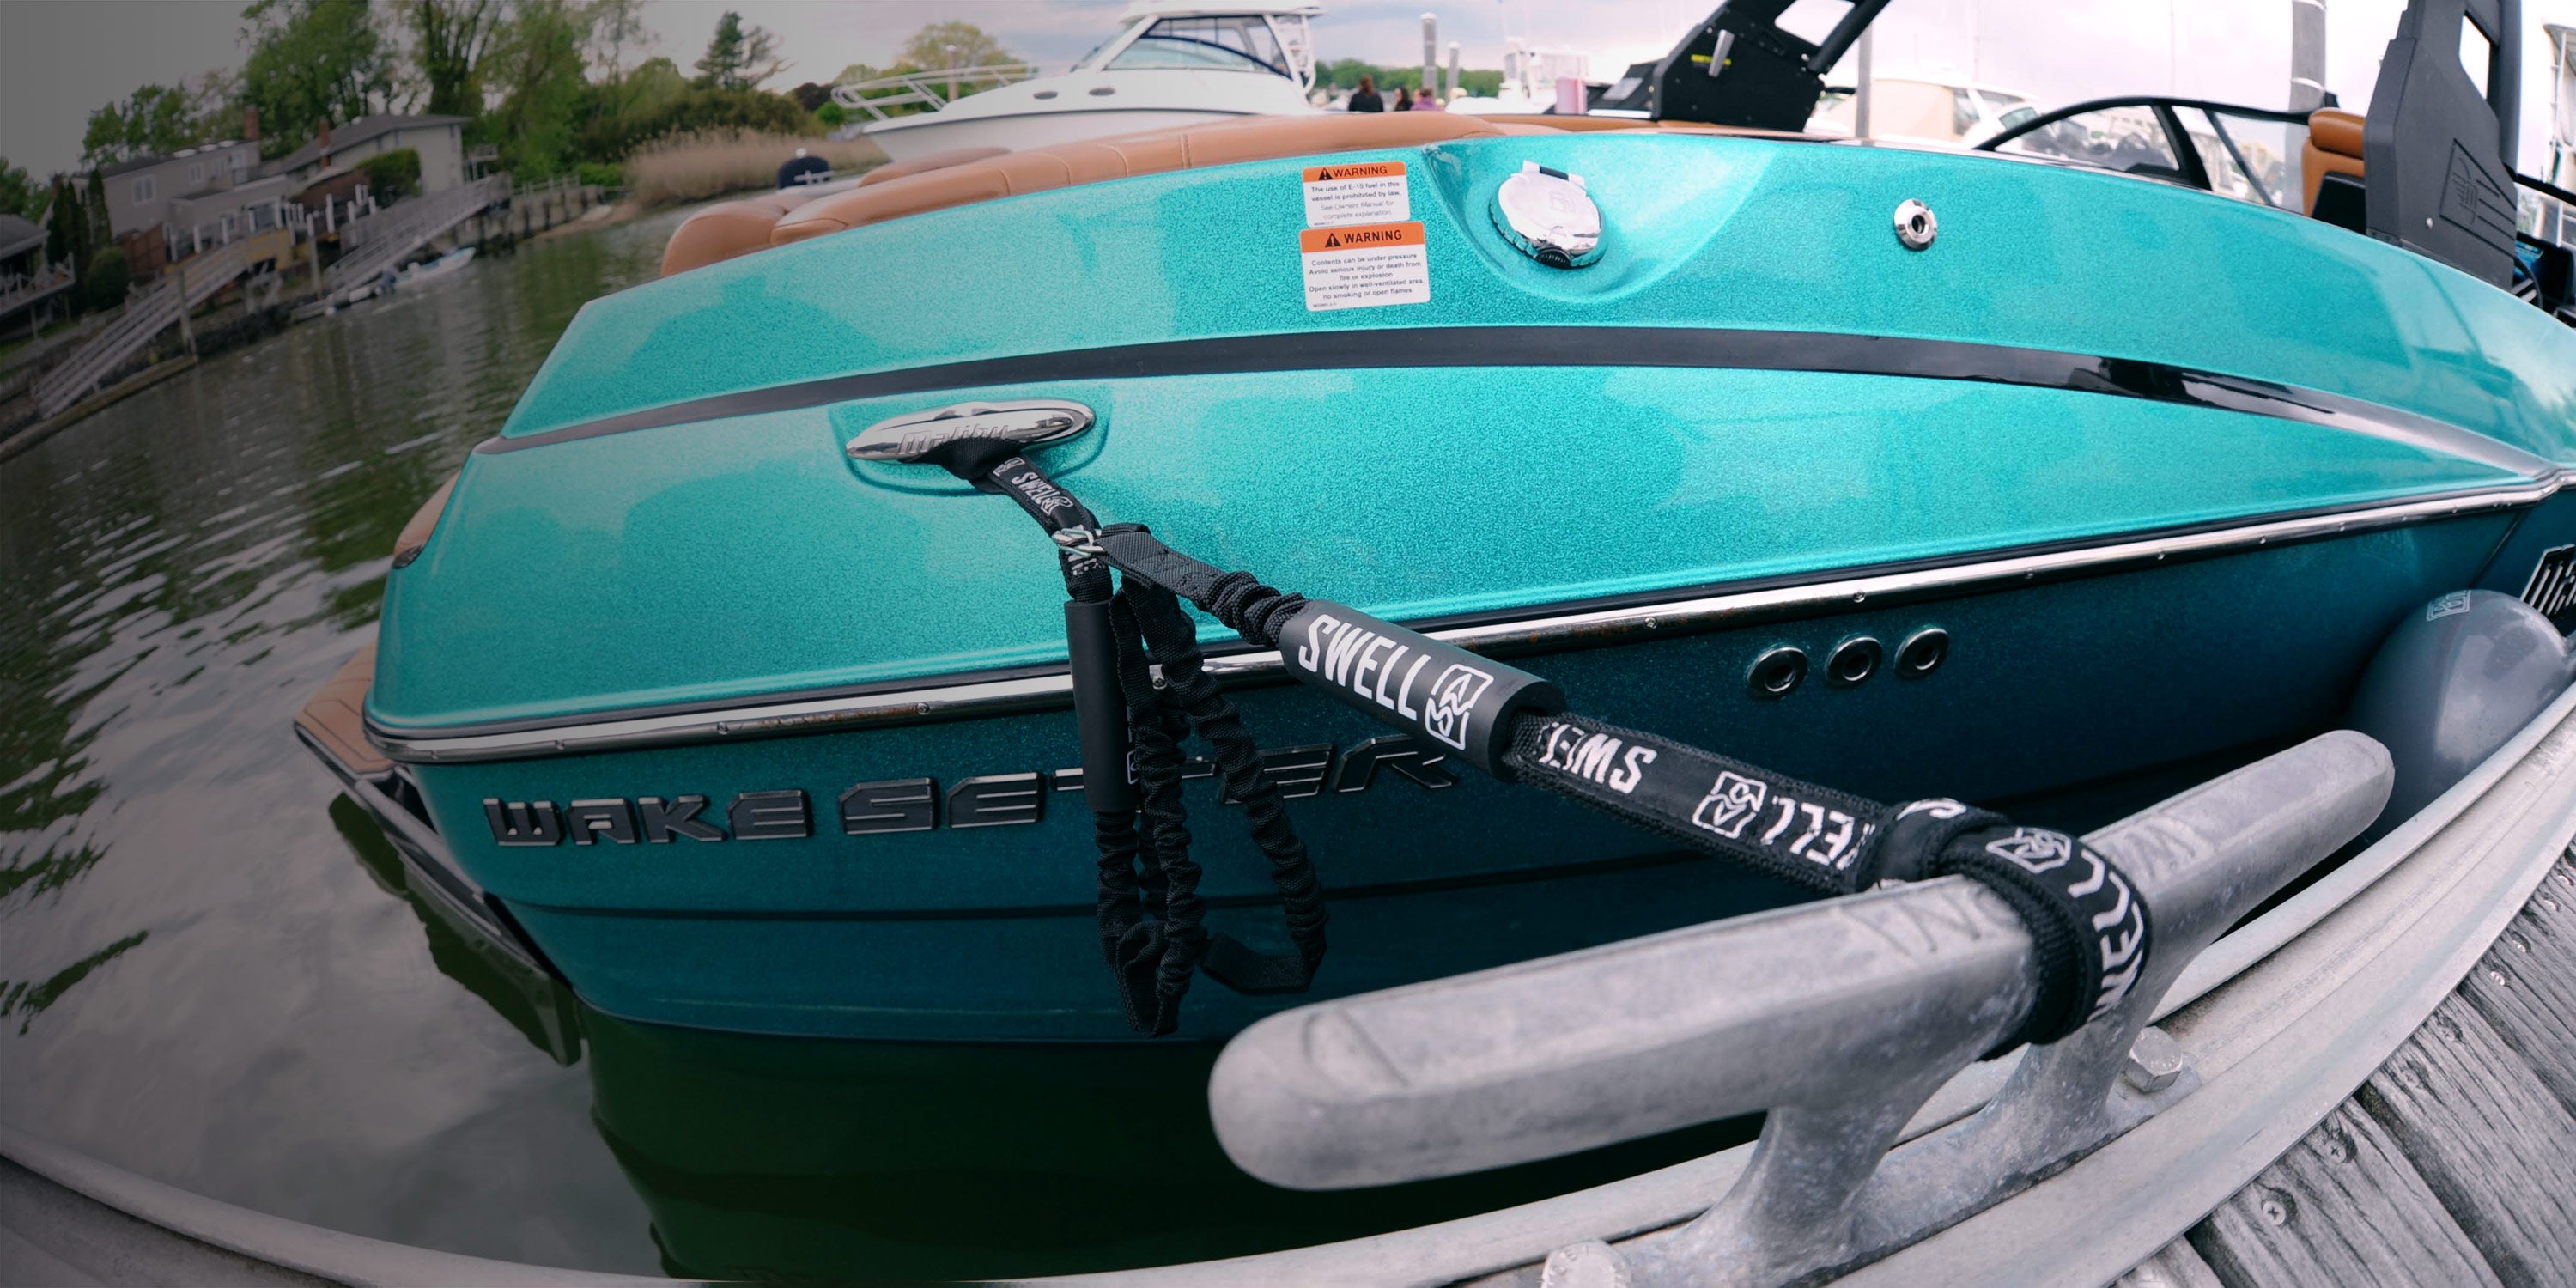 SWELL Wakesurf - Fenders - Bumpers, Lines, And More